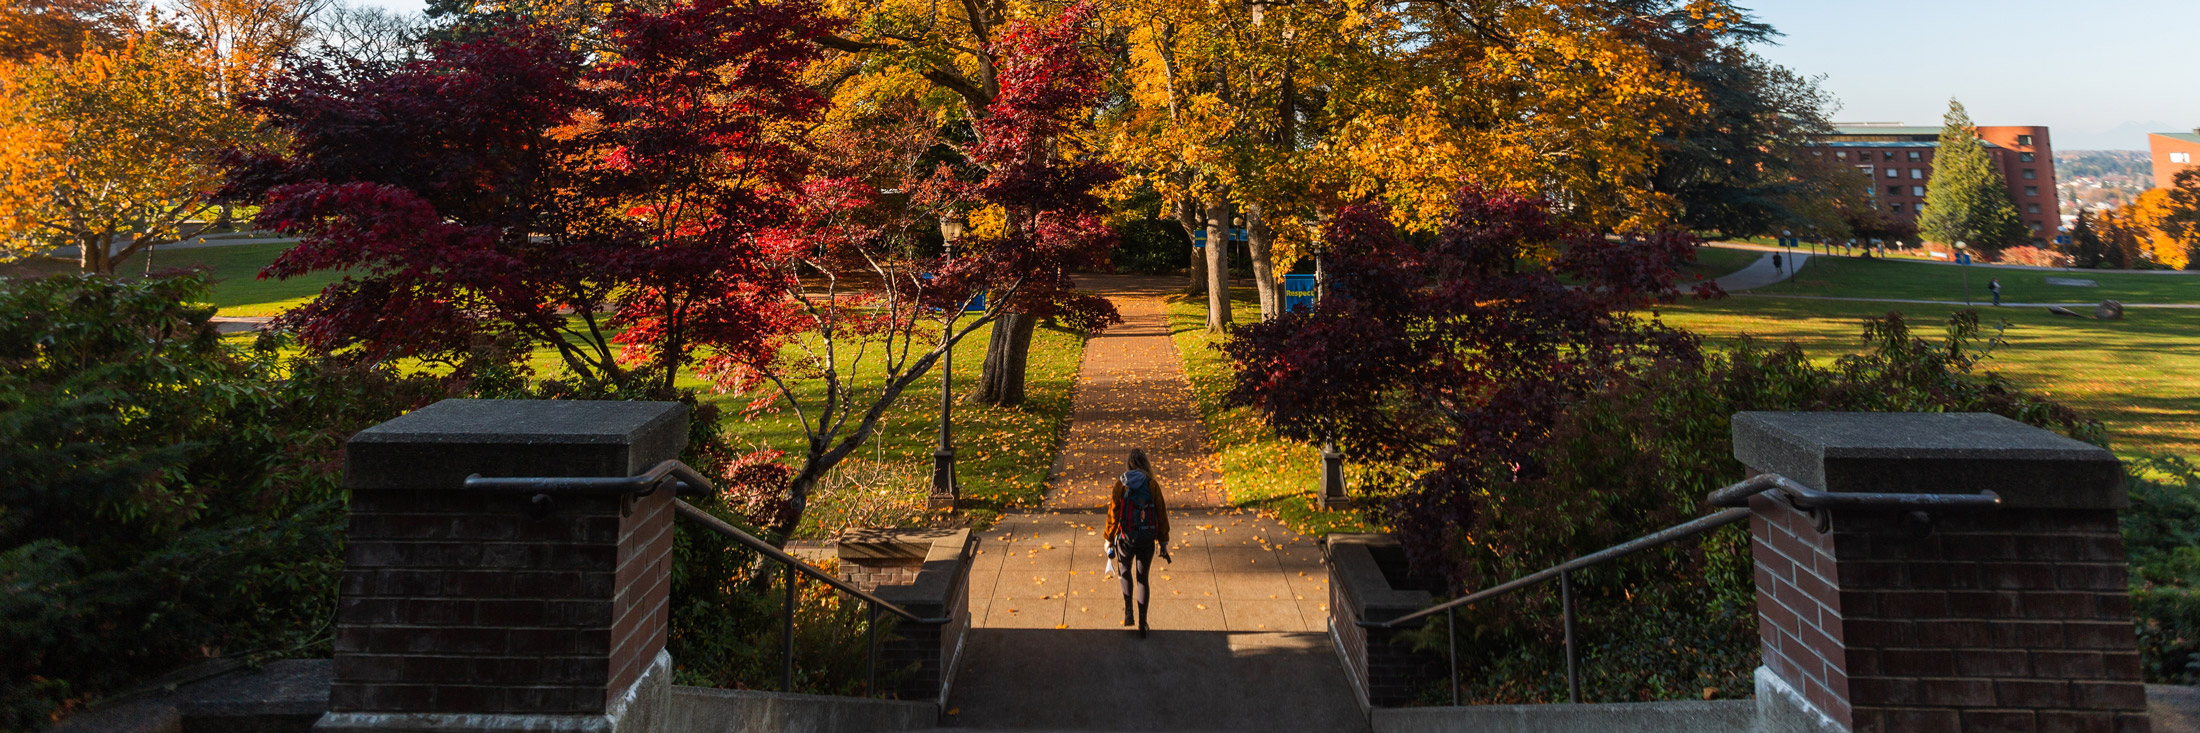 Fall on campus. Trees leaves are turning red and yellow. A student walks down the brick paths near Old Main.